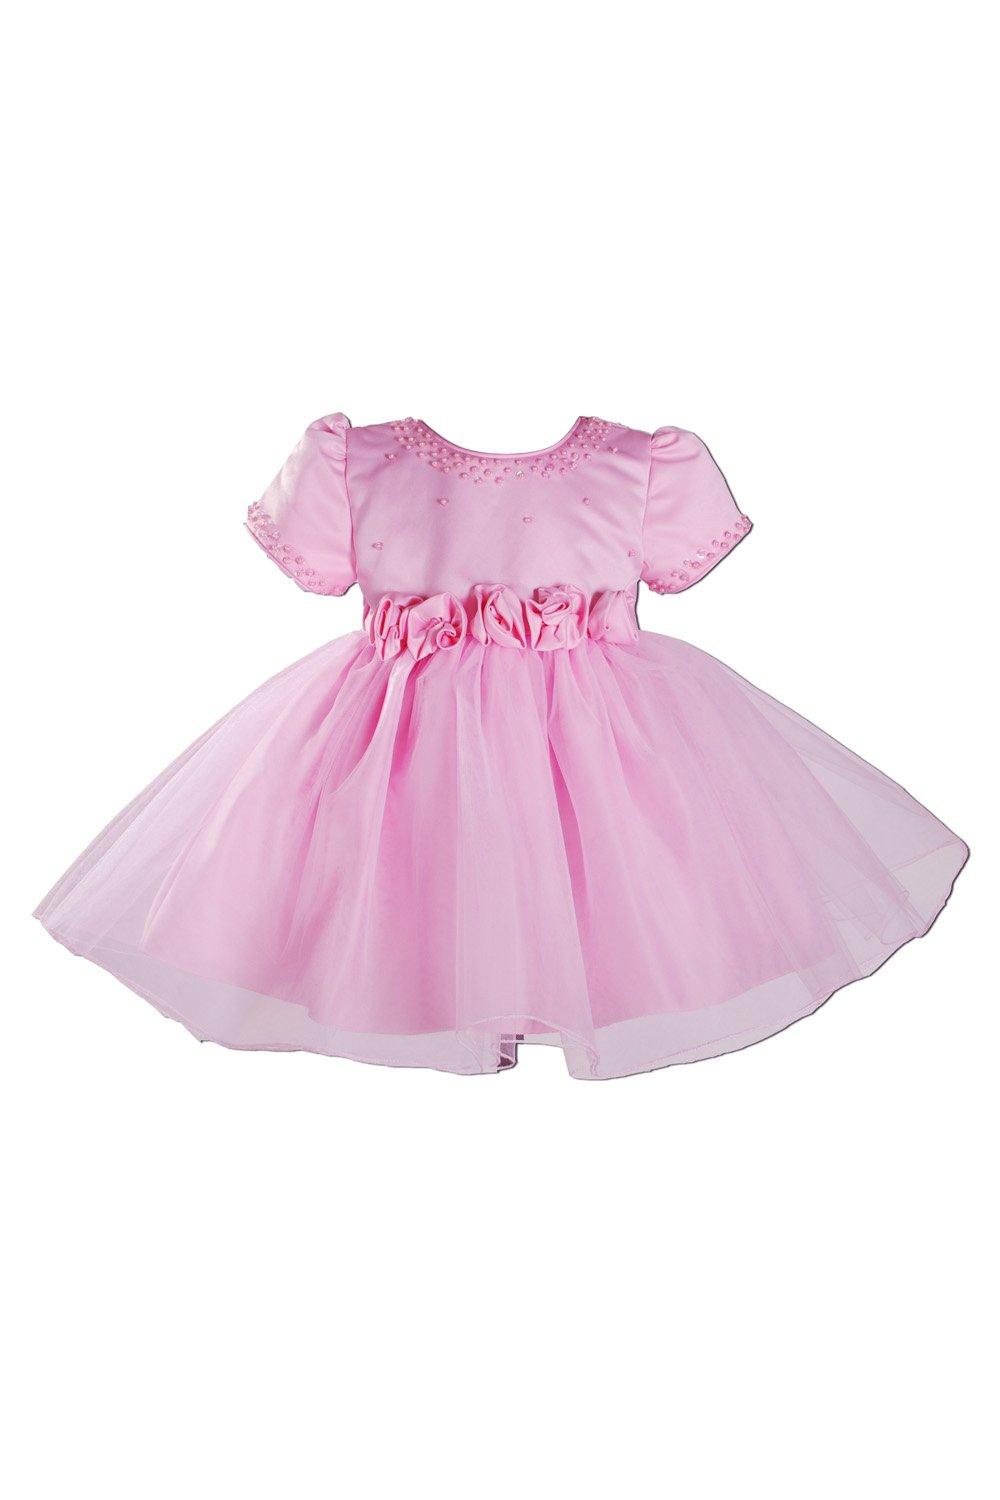 Ceremony Infant 1st Birthday Dress For Baby Girl Clothes Sequin Dress  Princess Dresses Party Baptism Clothing 0 1 2 Year